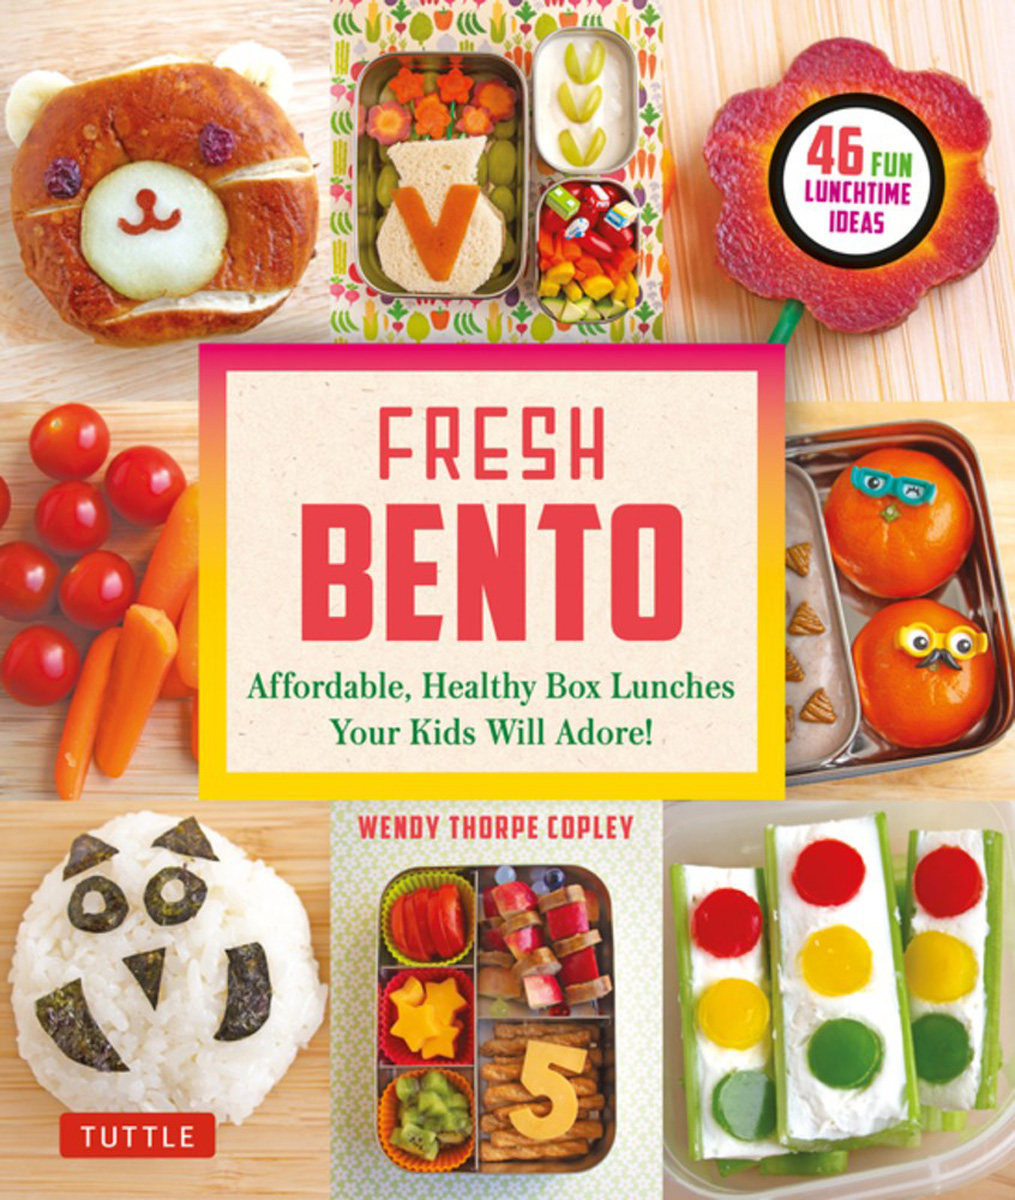 Fresh Bento: Affordable, Healthy Box Lunches Your Kids Will Adore image count 0